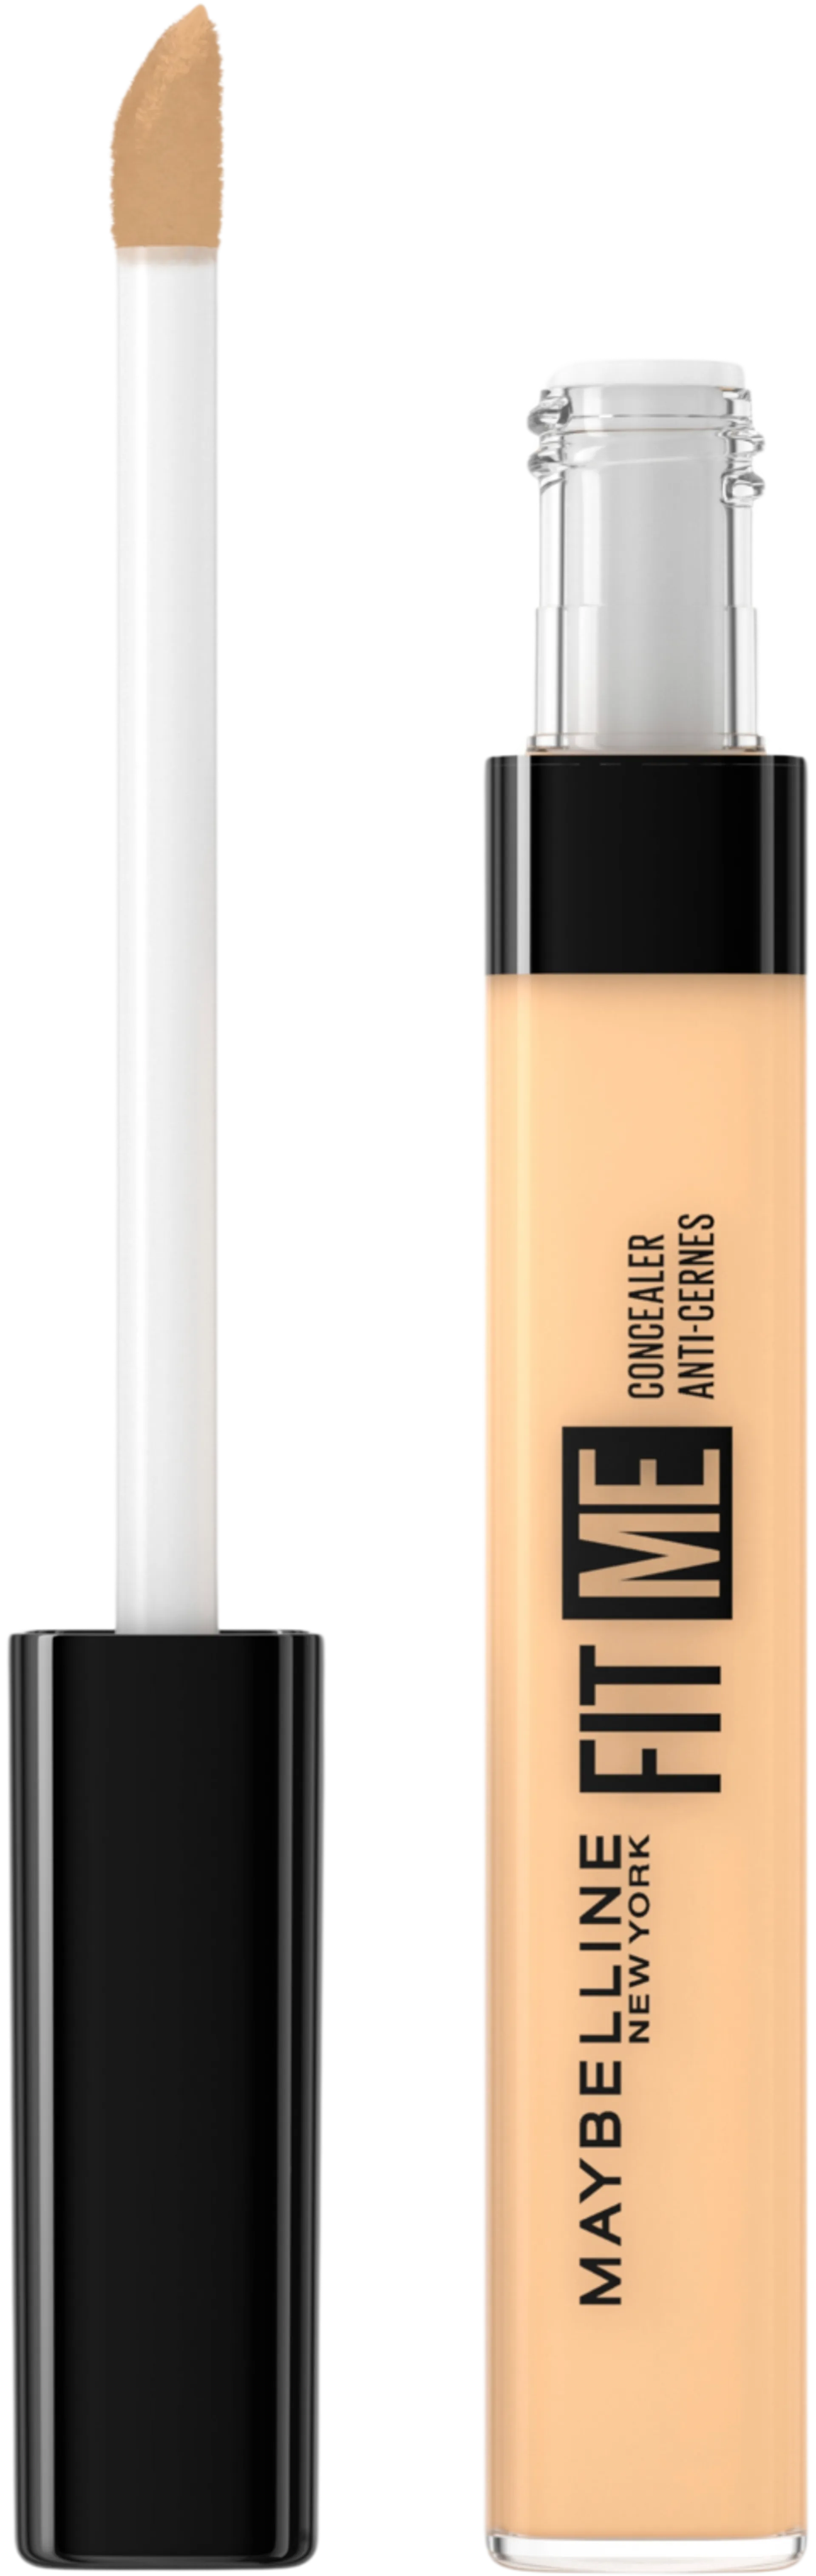 Maybelline New York Fit Me 20 Sand -peitevoide 6,8ml - 1